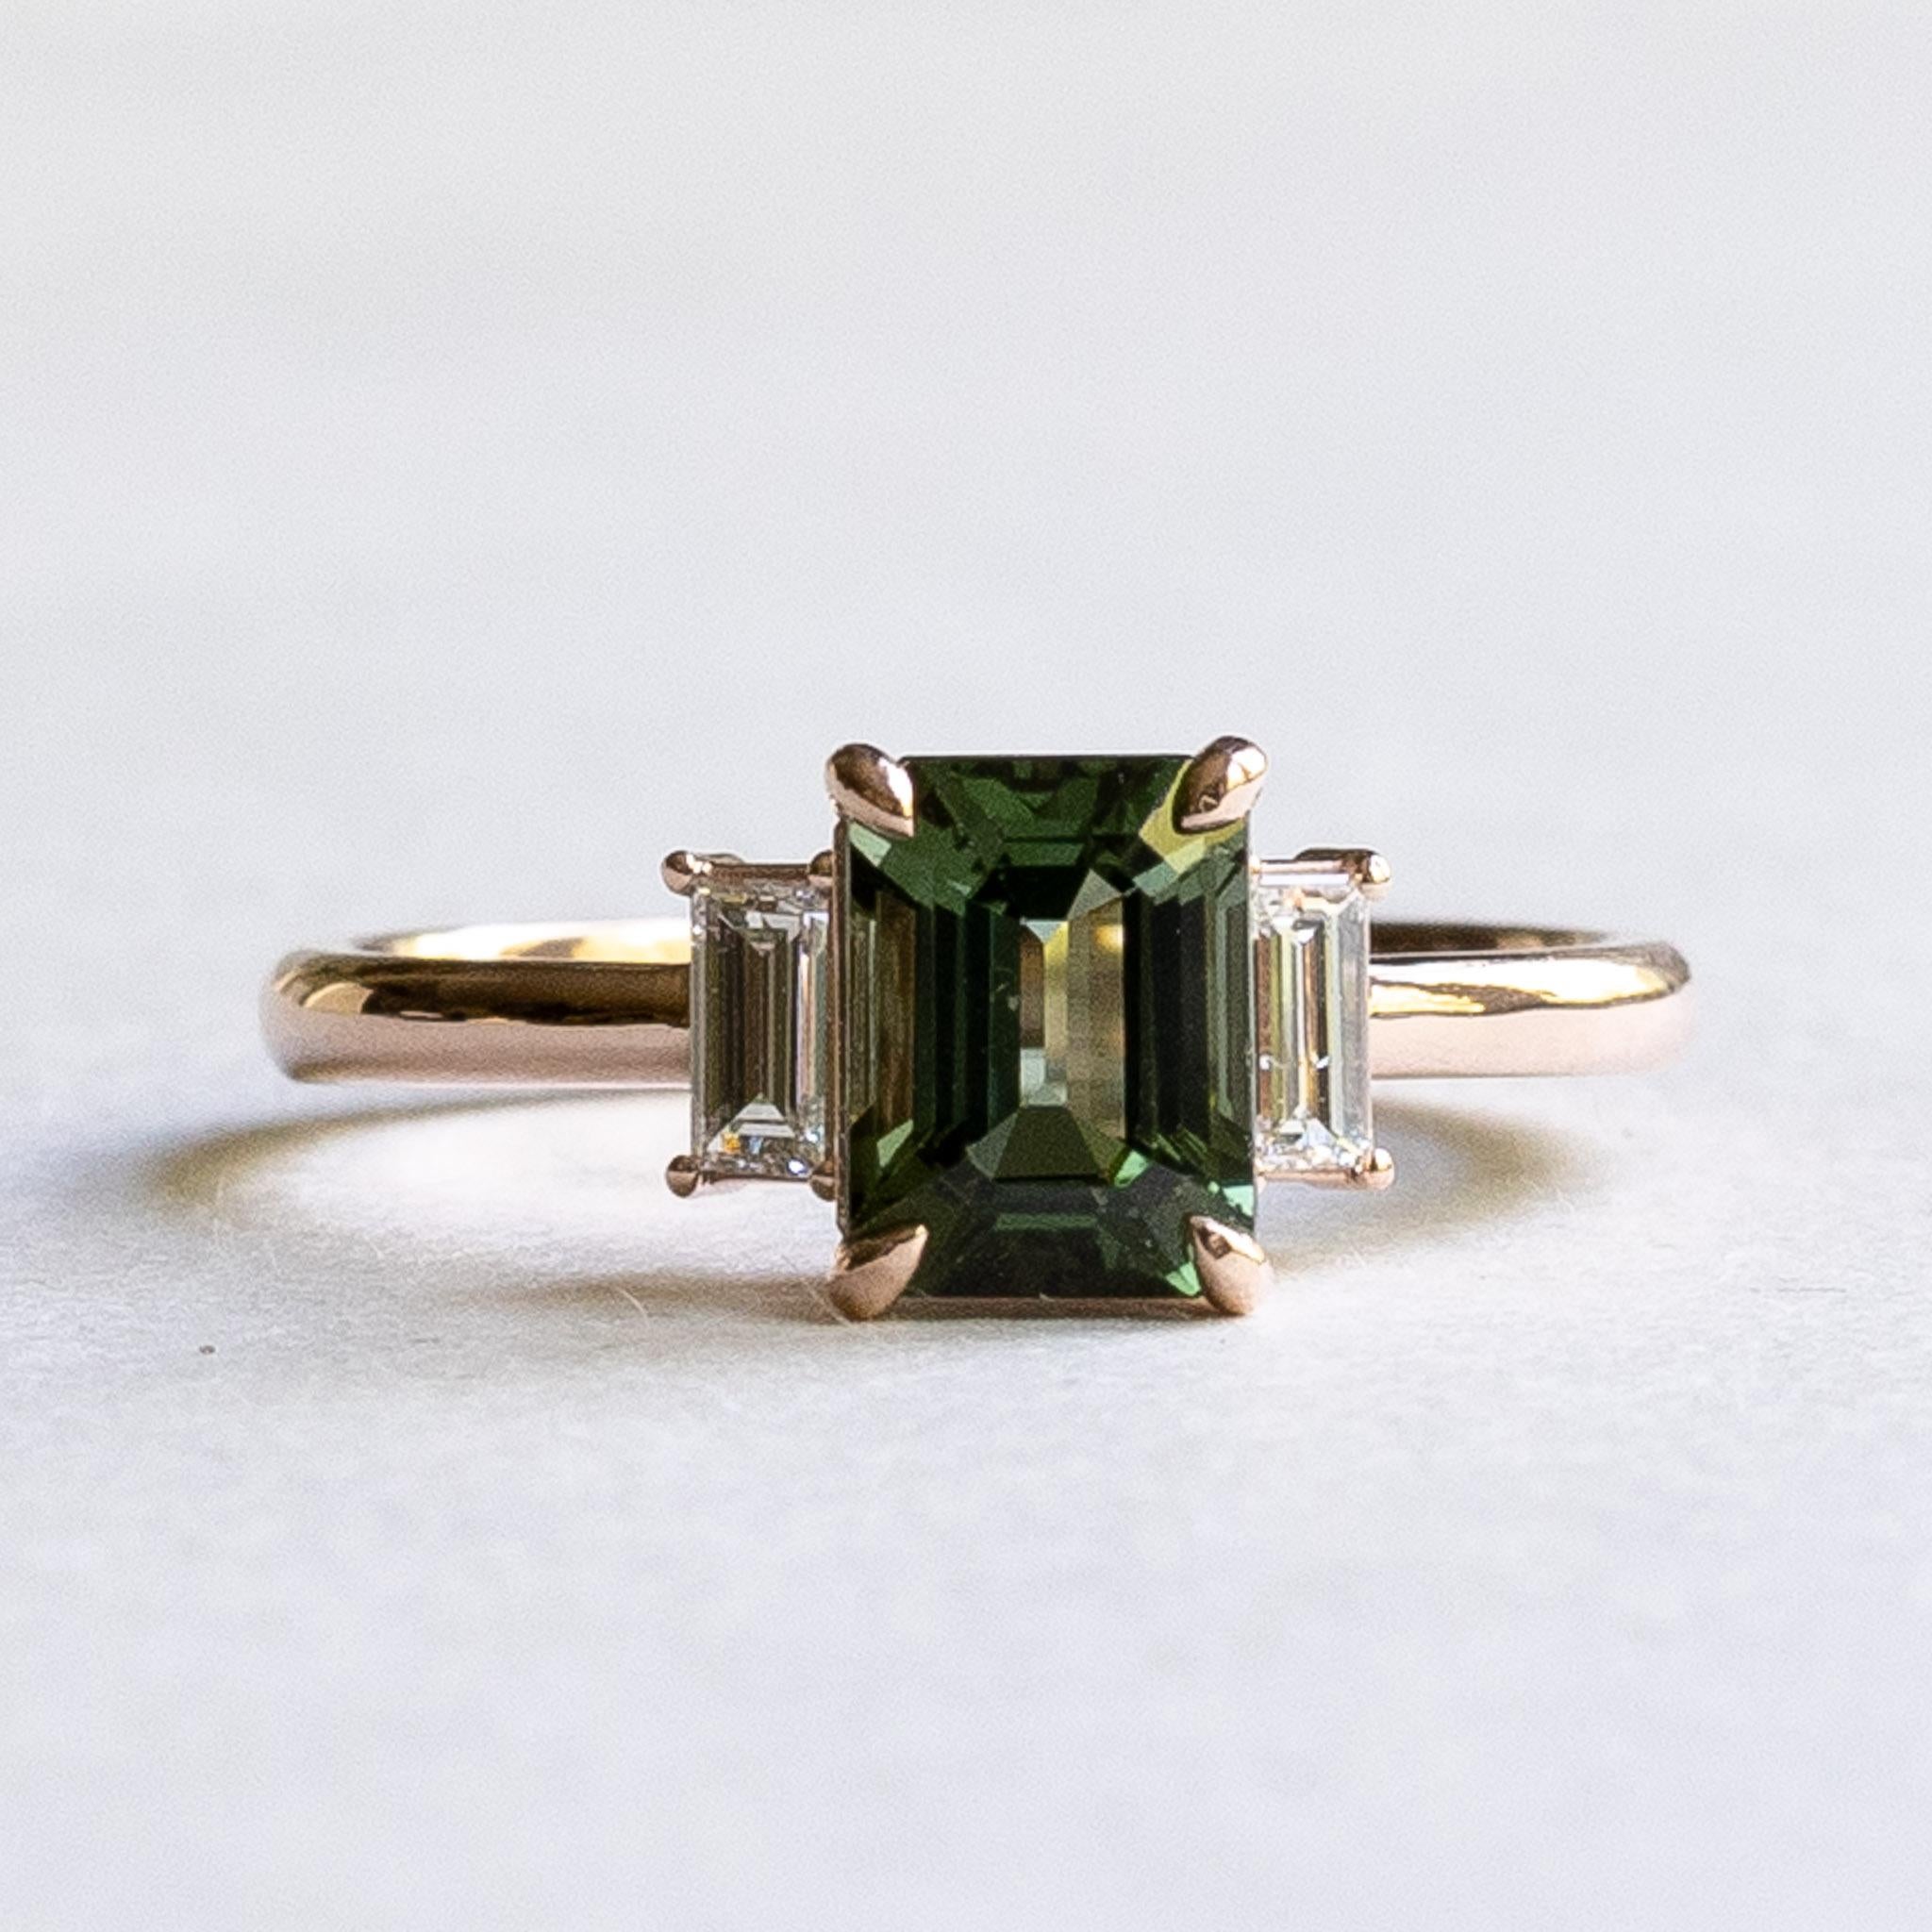 For Sale:  Green Tourmaline Emerald Cut Ring with Baguette Diamonds, Three Stone Ring 8